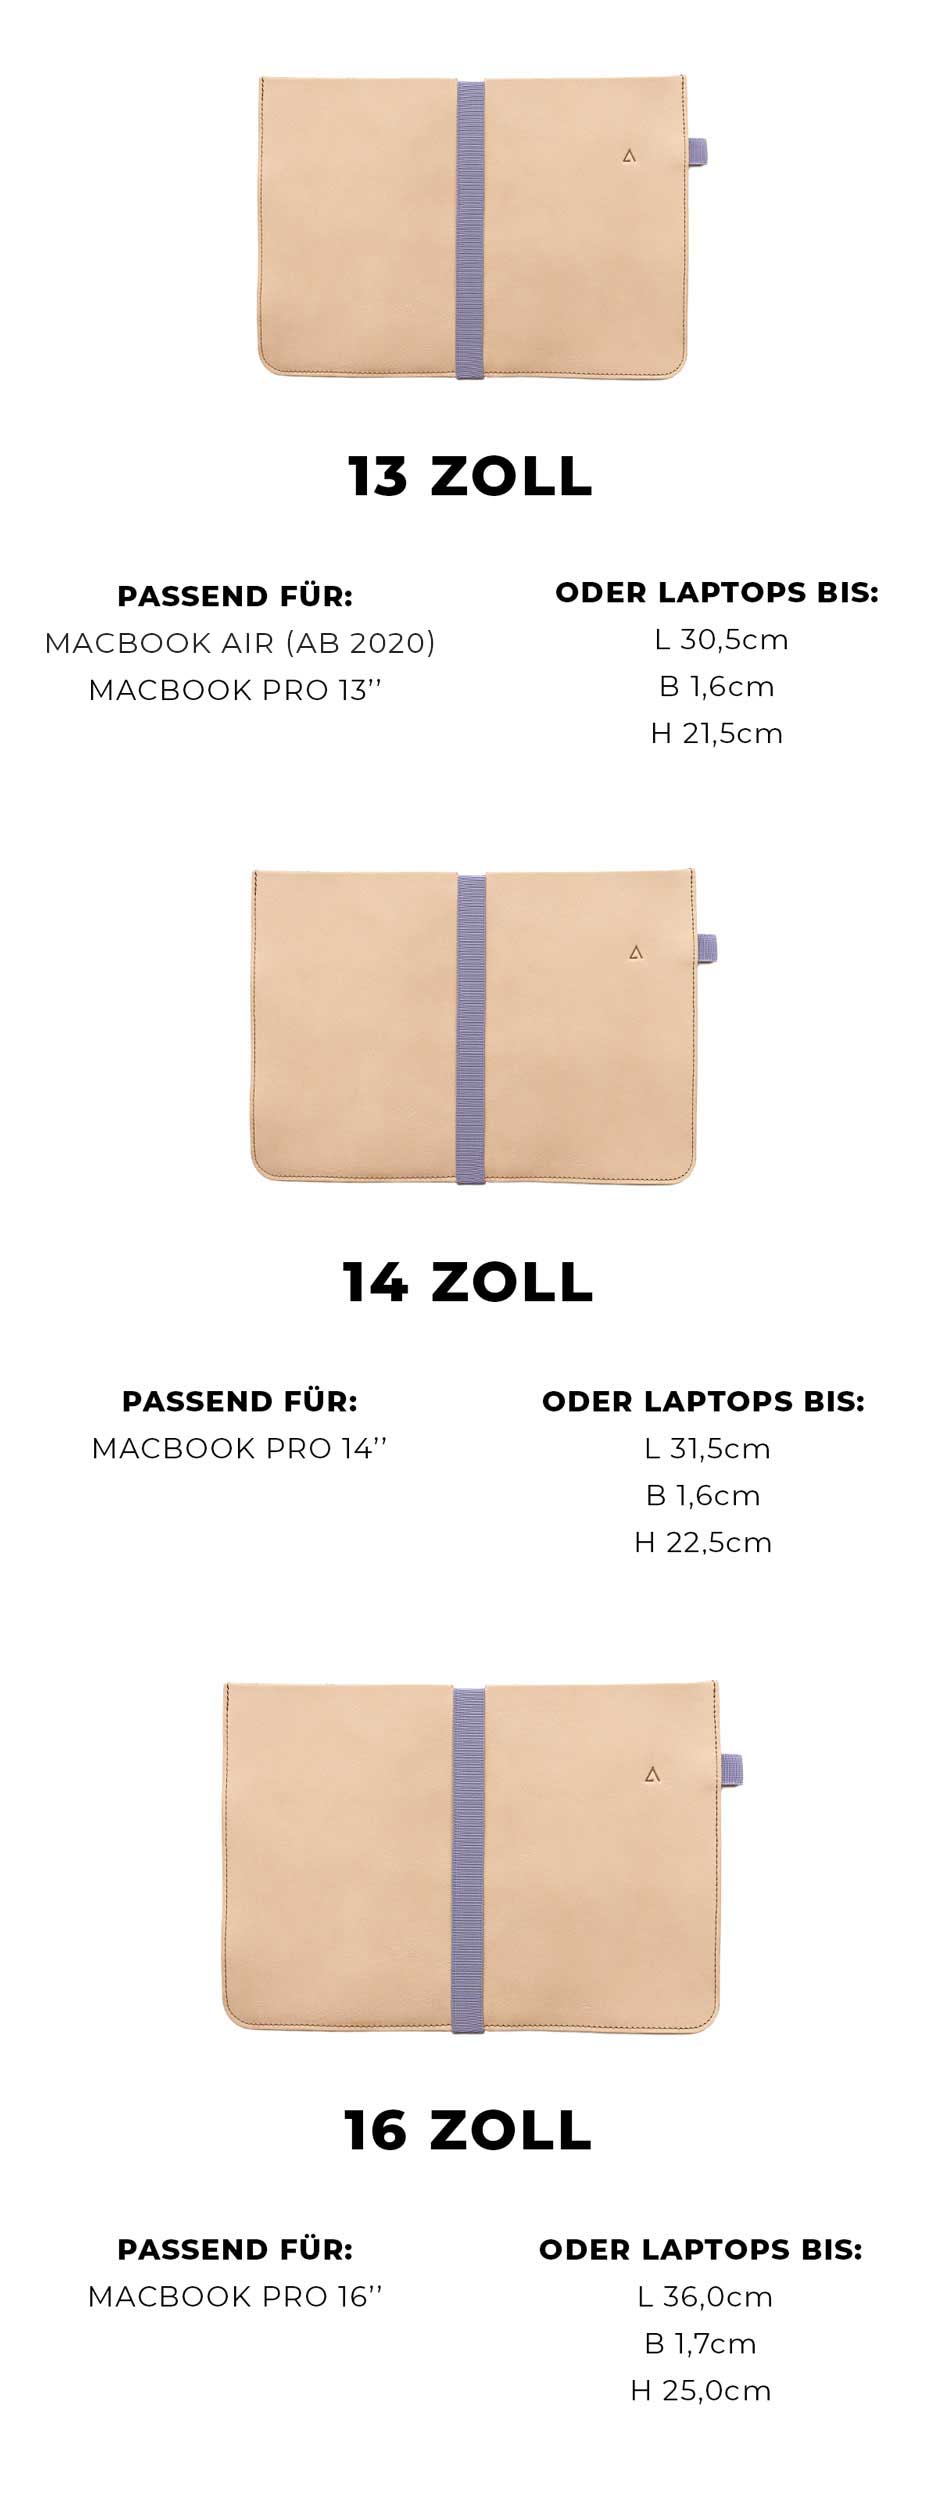 In our overview, you can check whether your laptop will find enough room in our 13-, 14- or 16-inch sleeve.